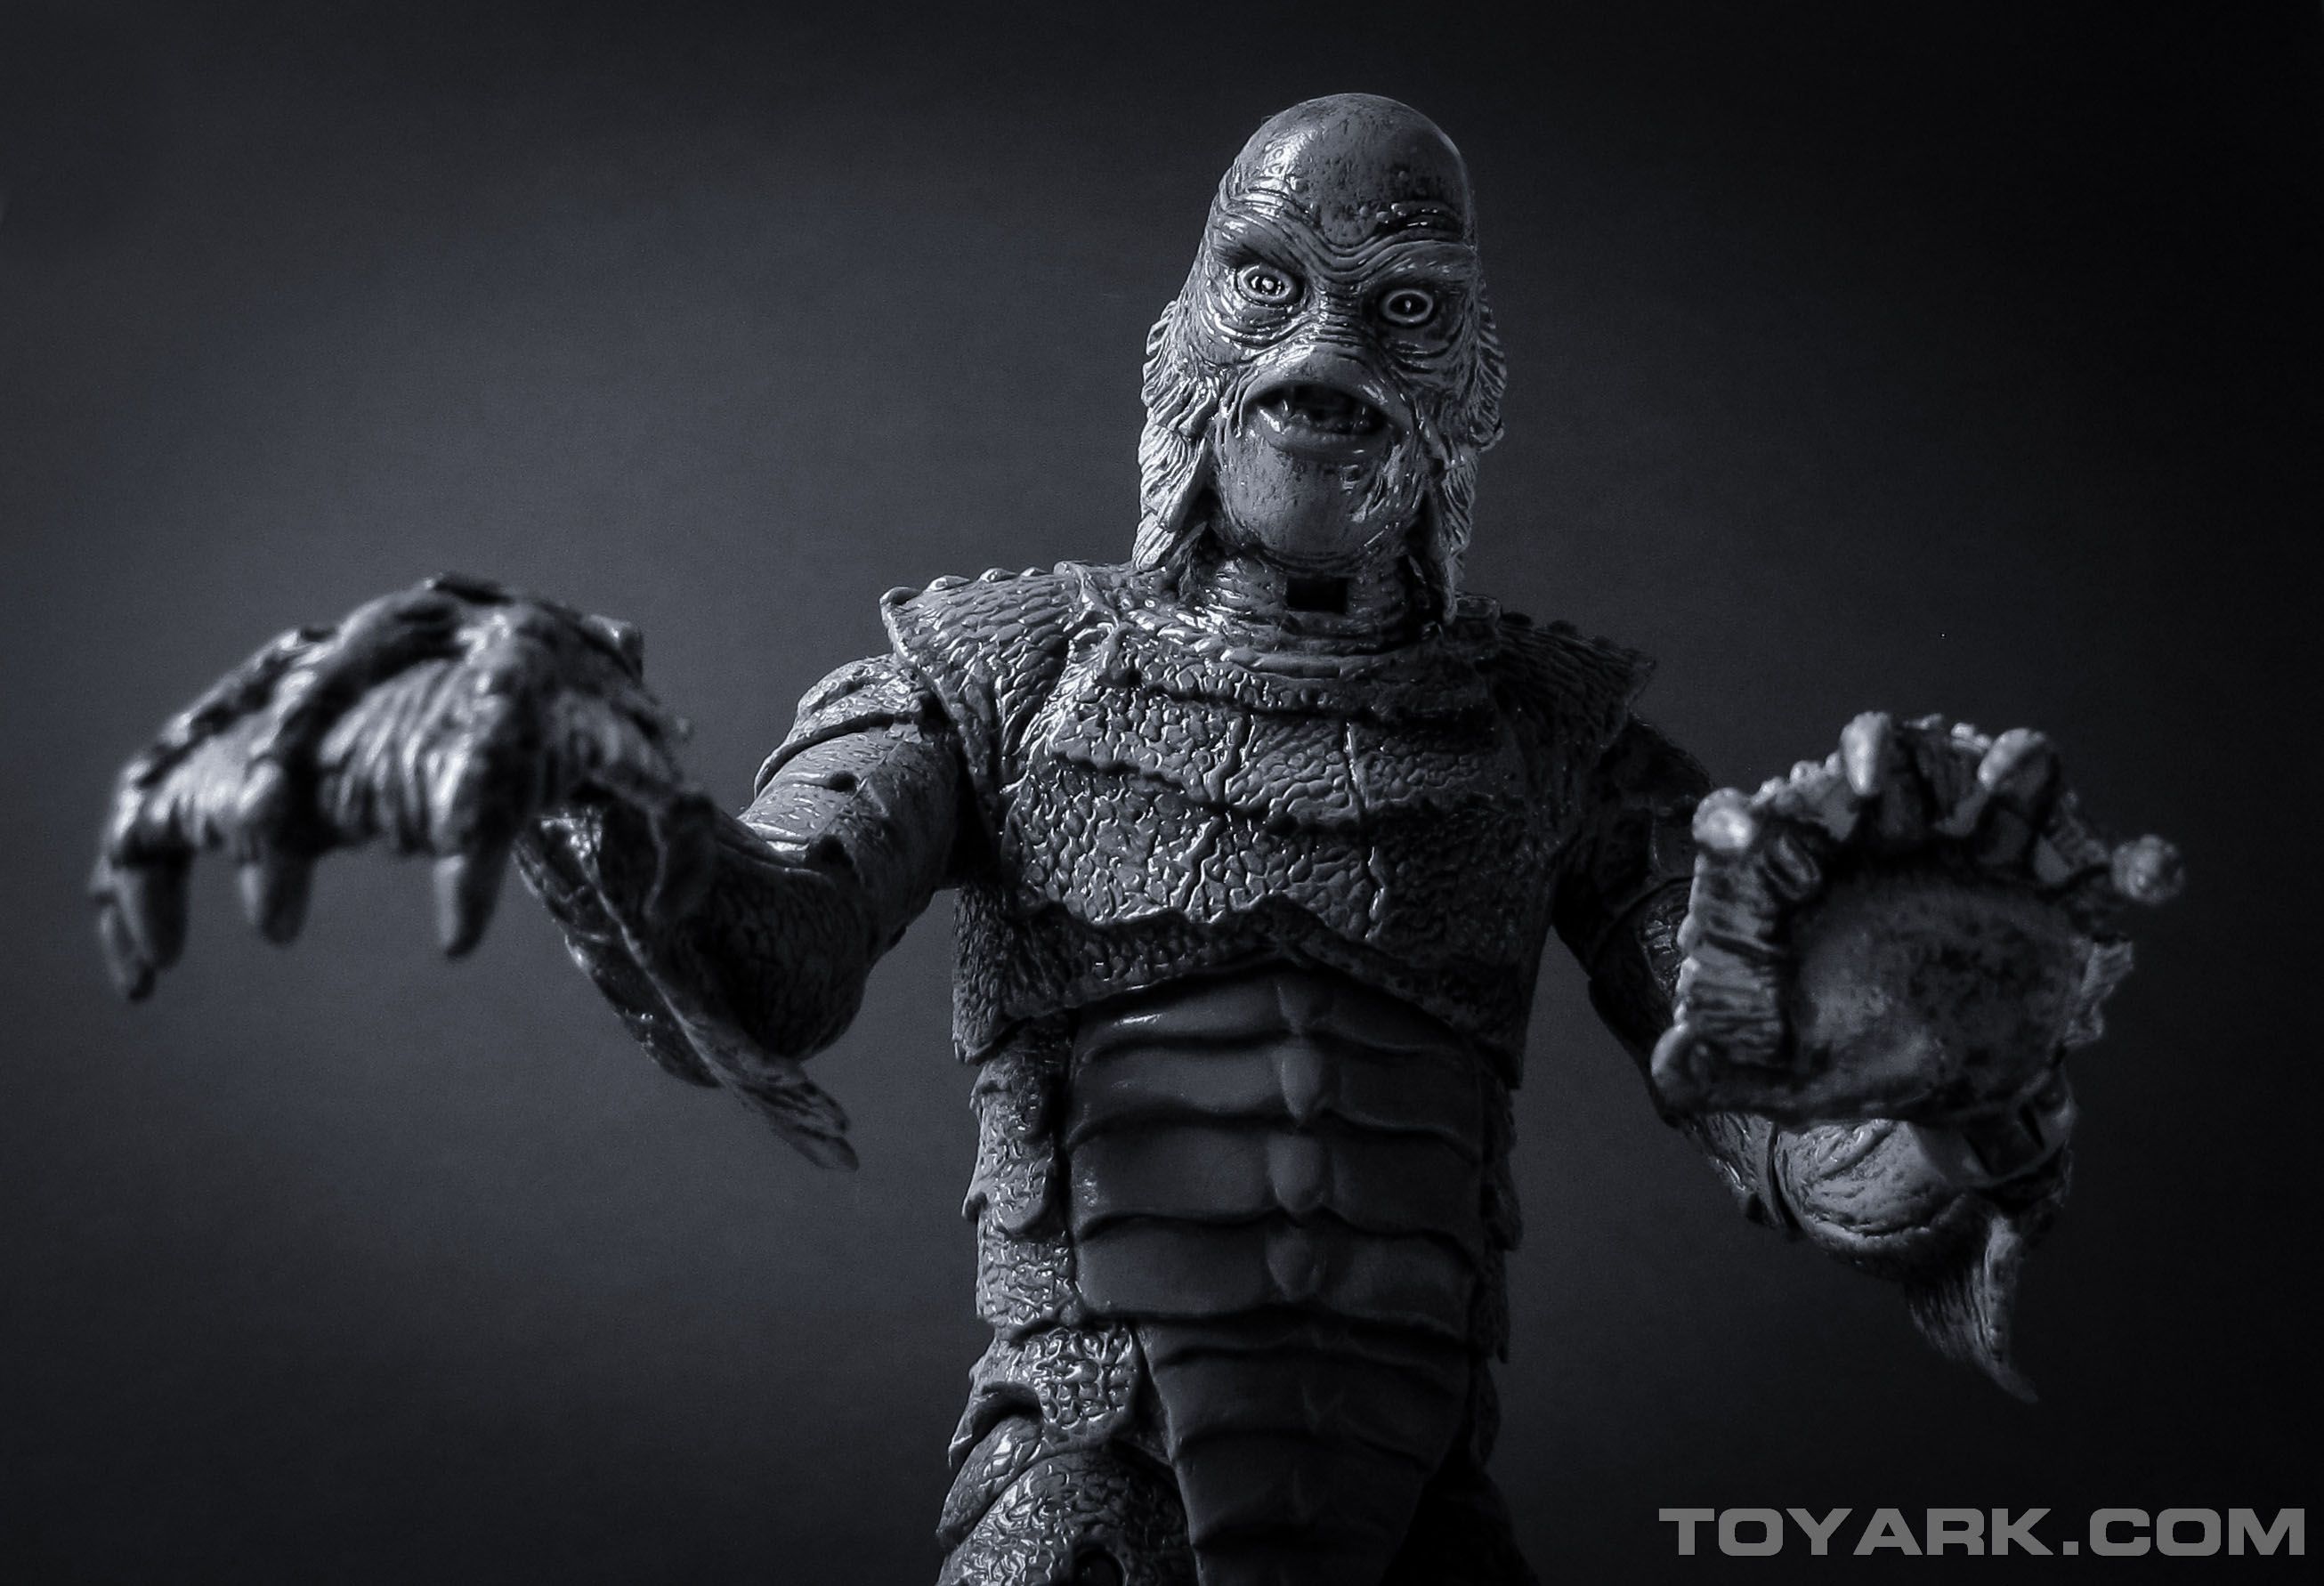 Toyark Gallery and Review for Creature from the Black Lagoon Select